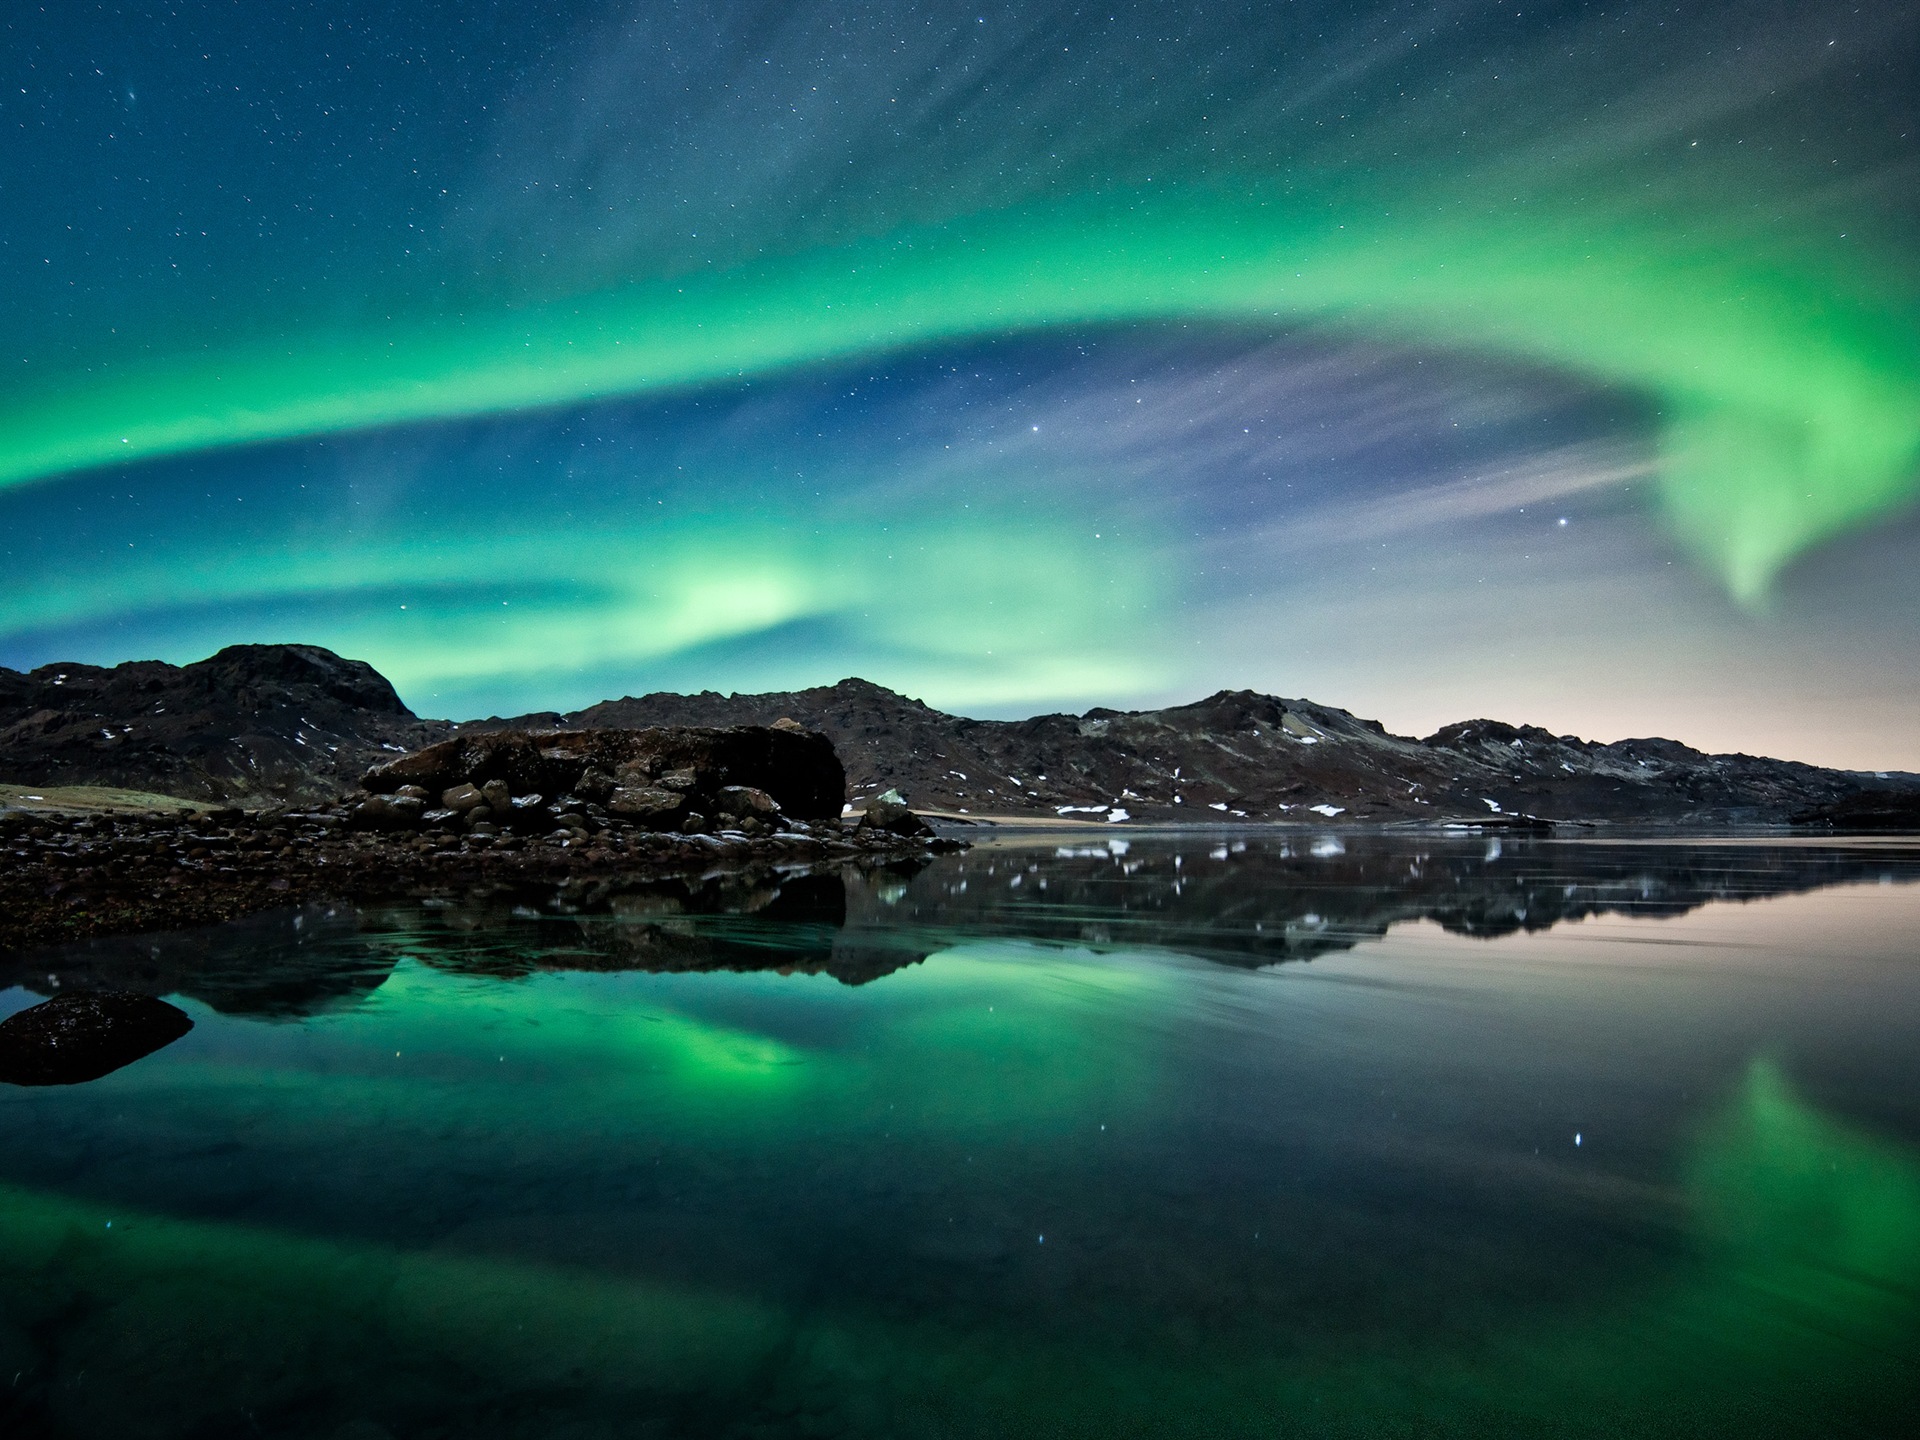 Natural wonders of the Northern Lights HD Wallpaper (1) #1 - 1920x1440